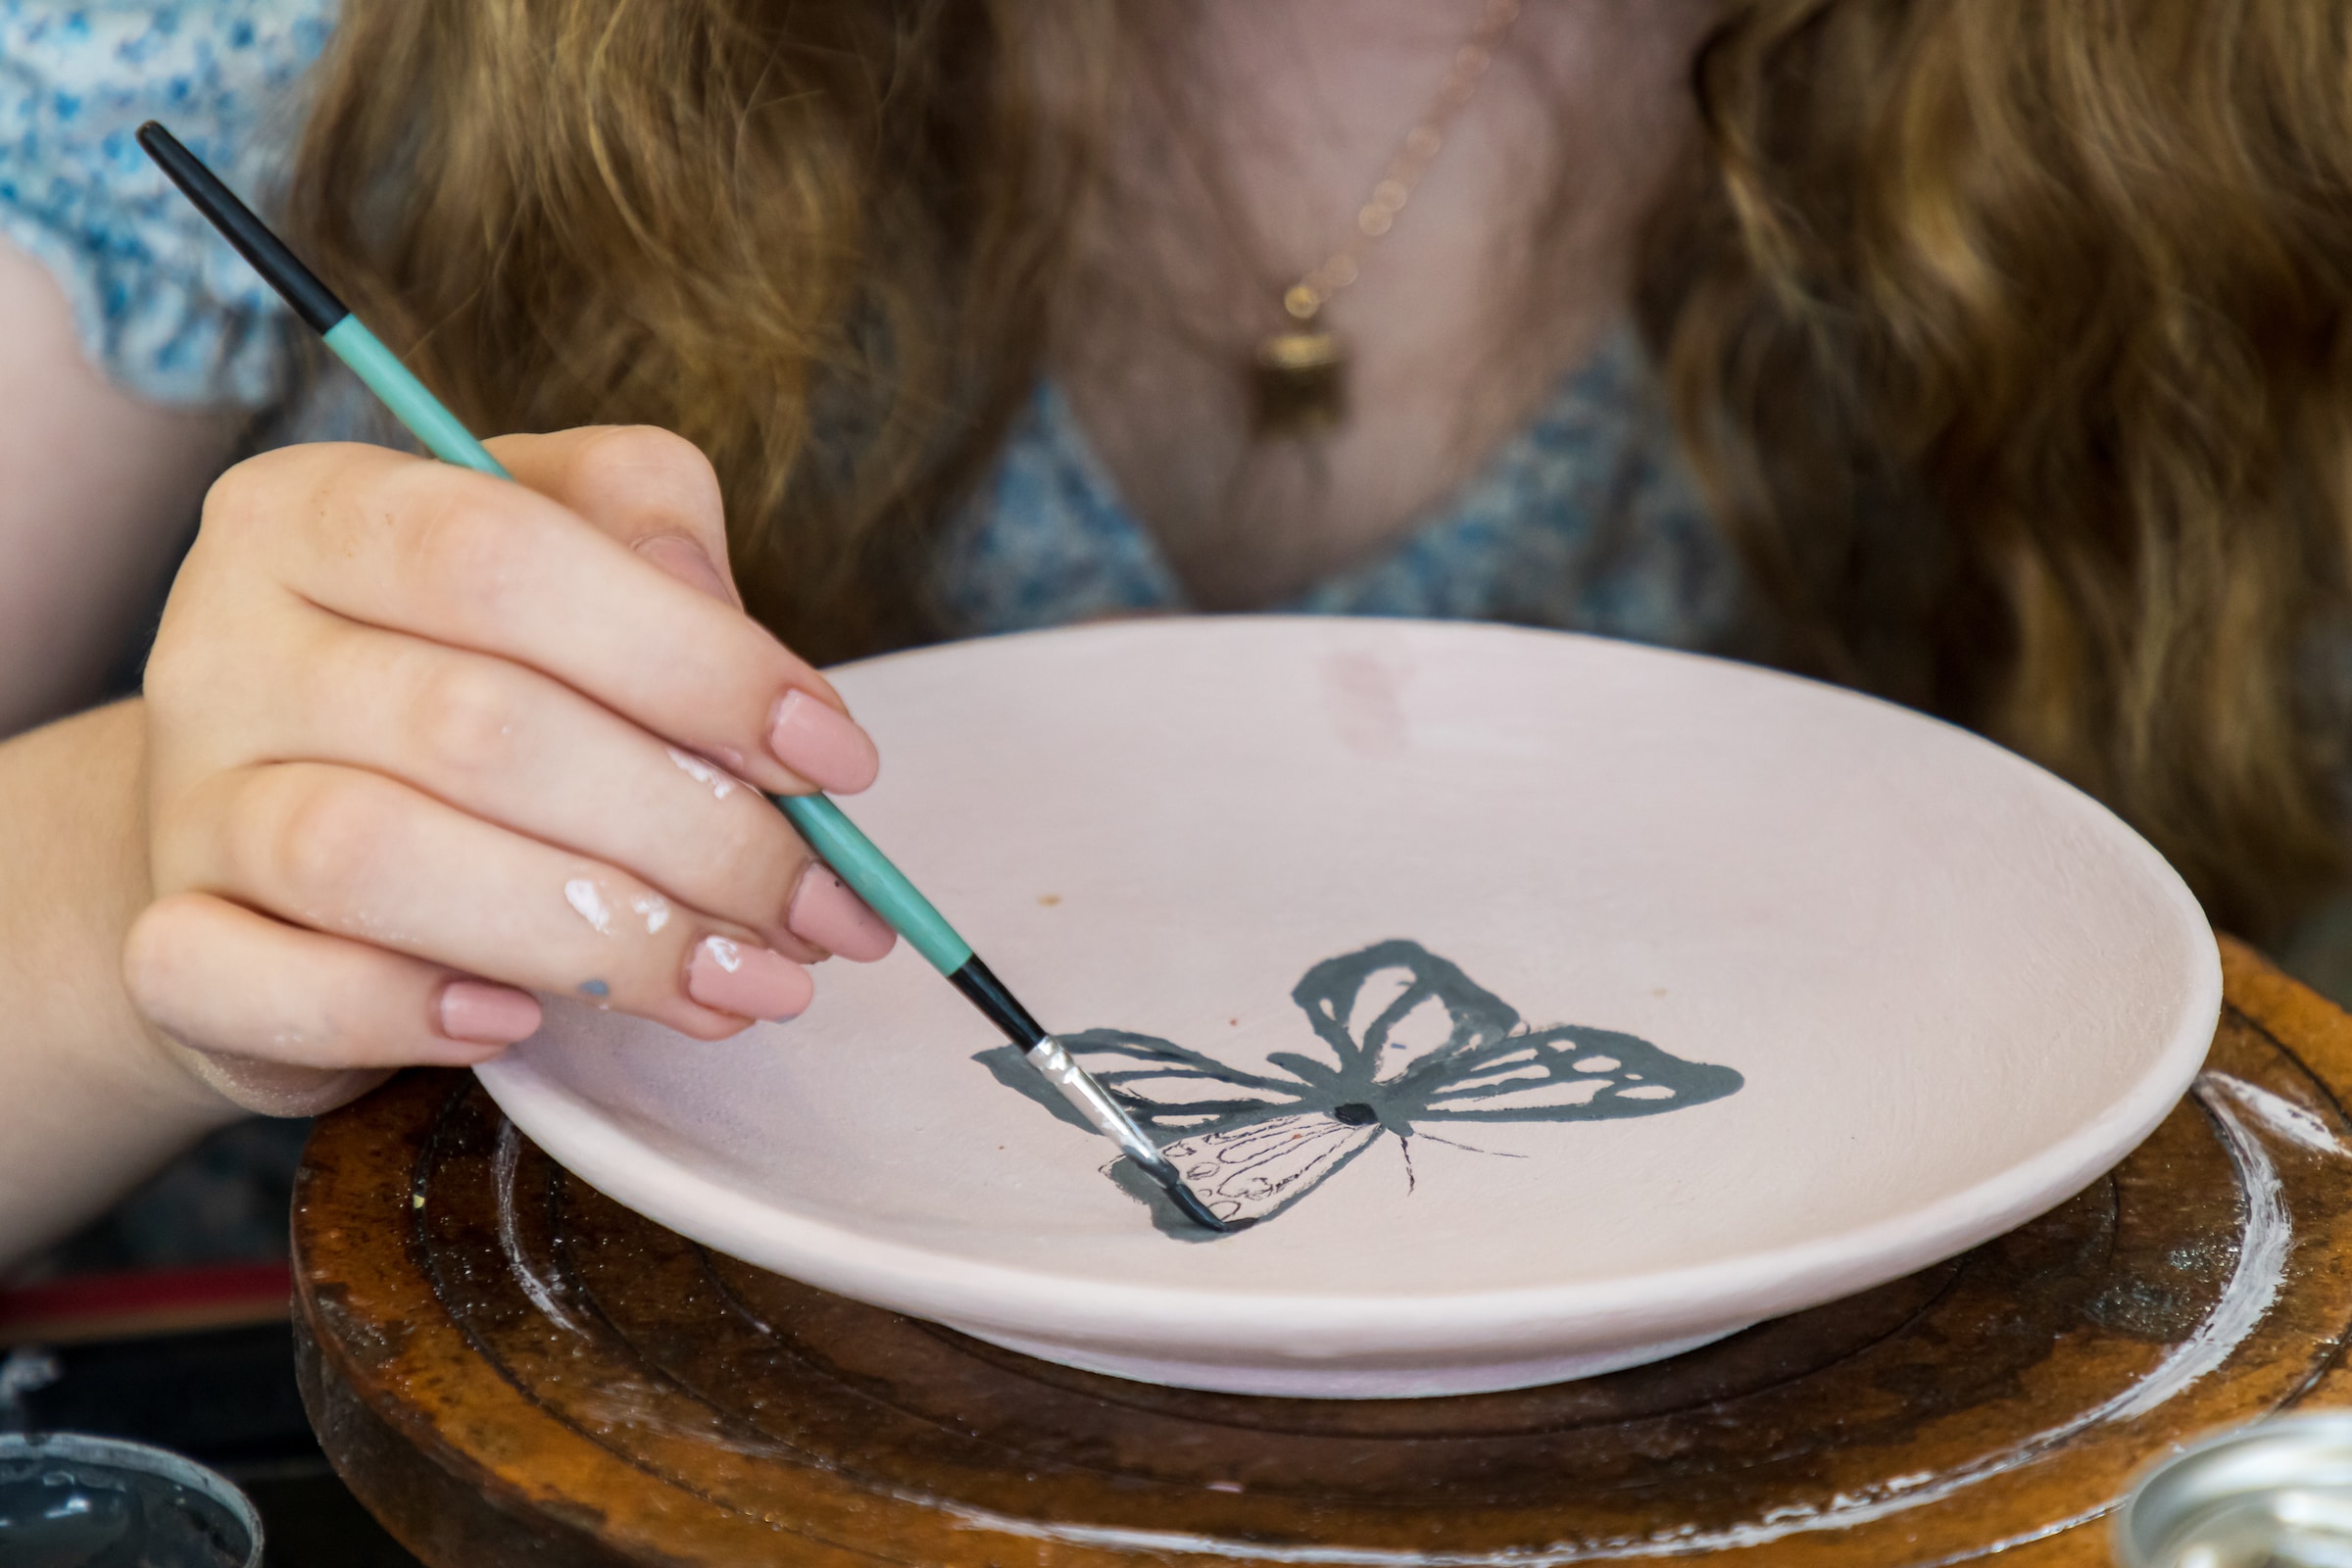 Person painting on pottery | Source: Unsplash